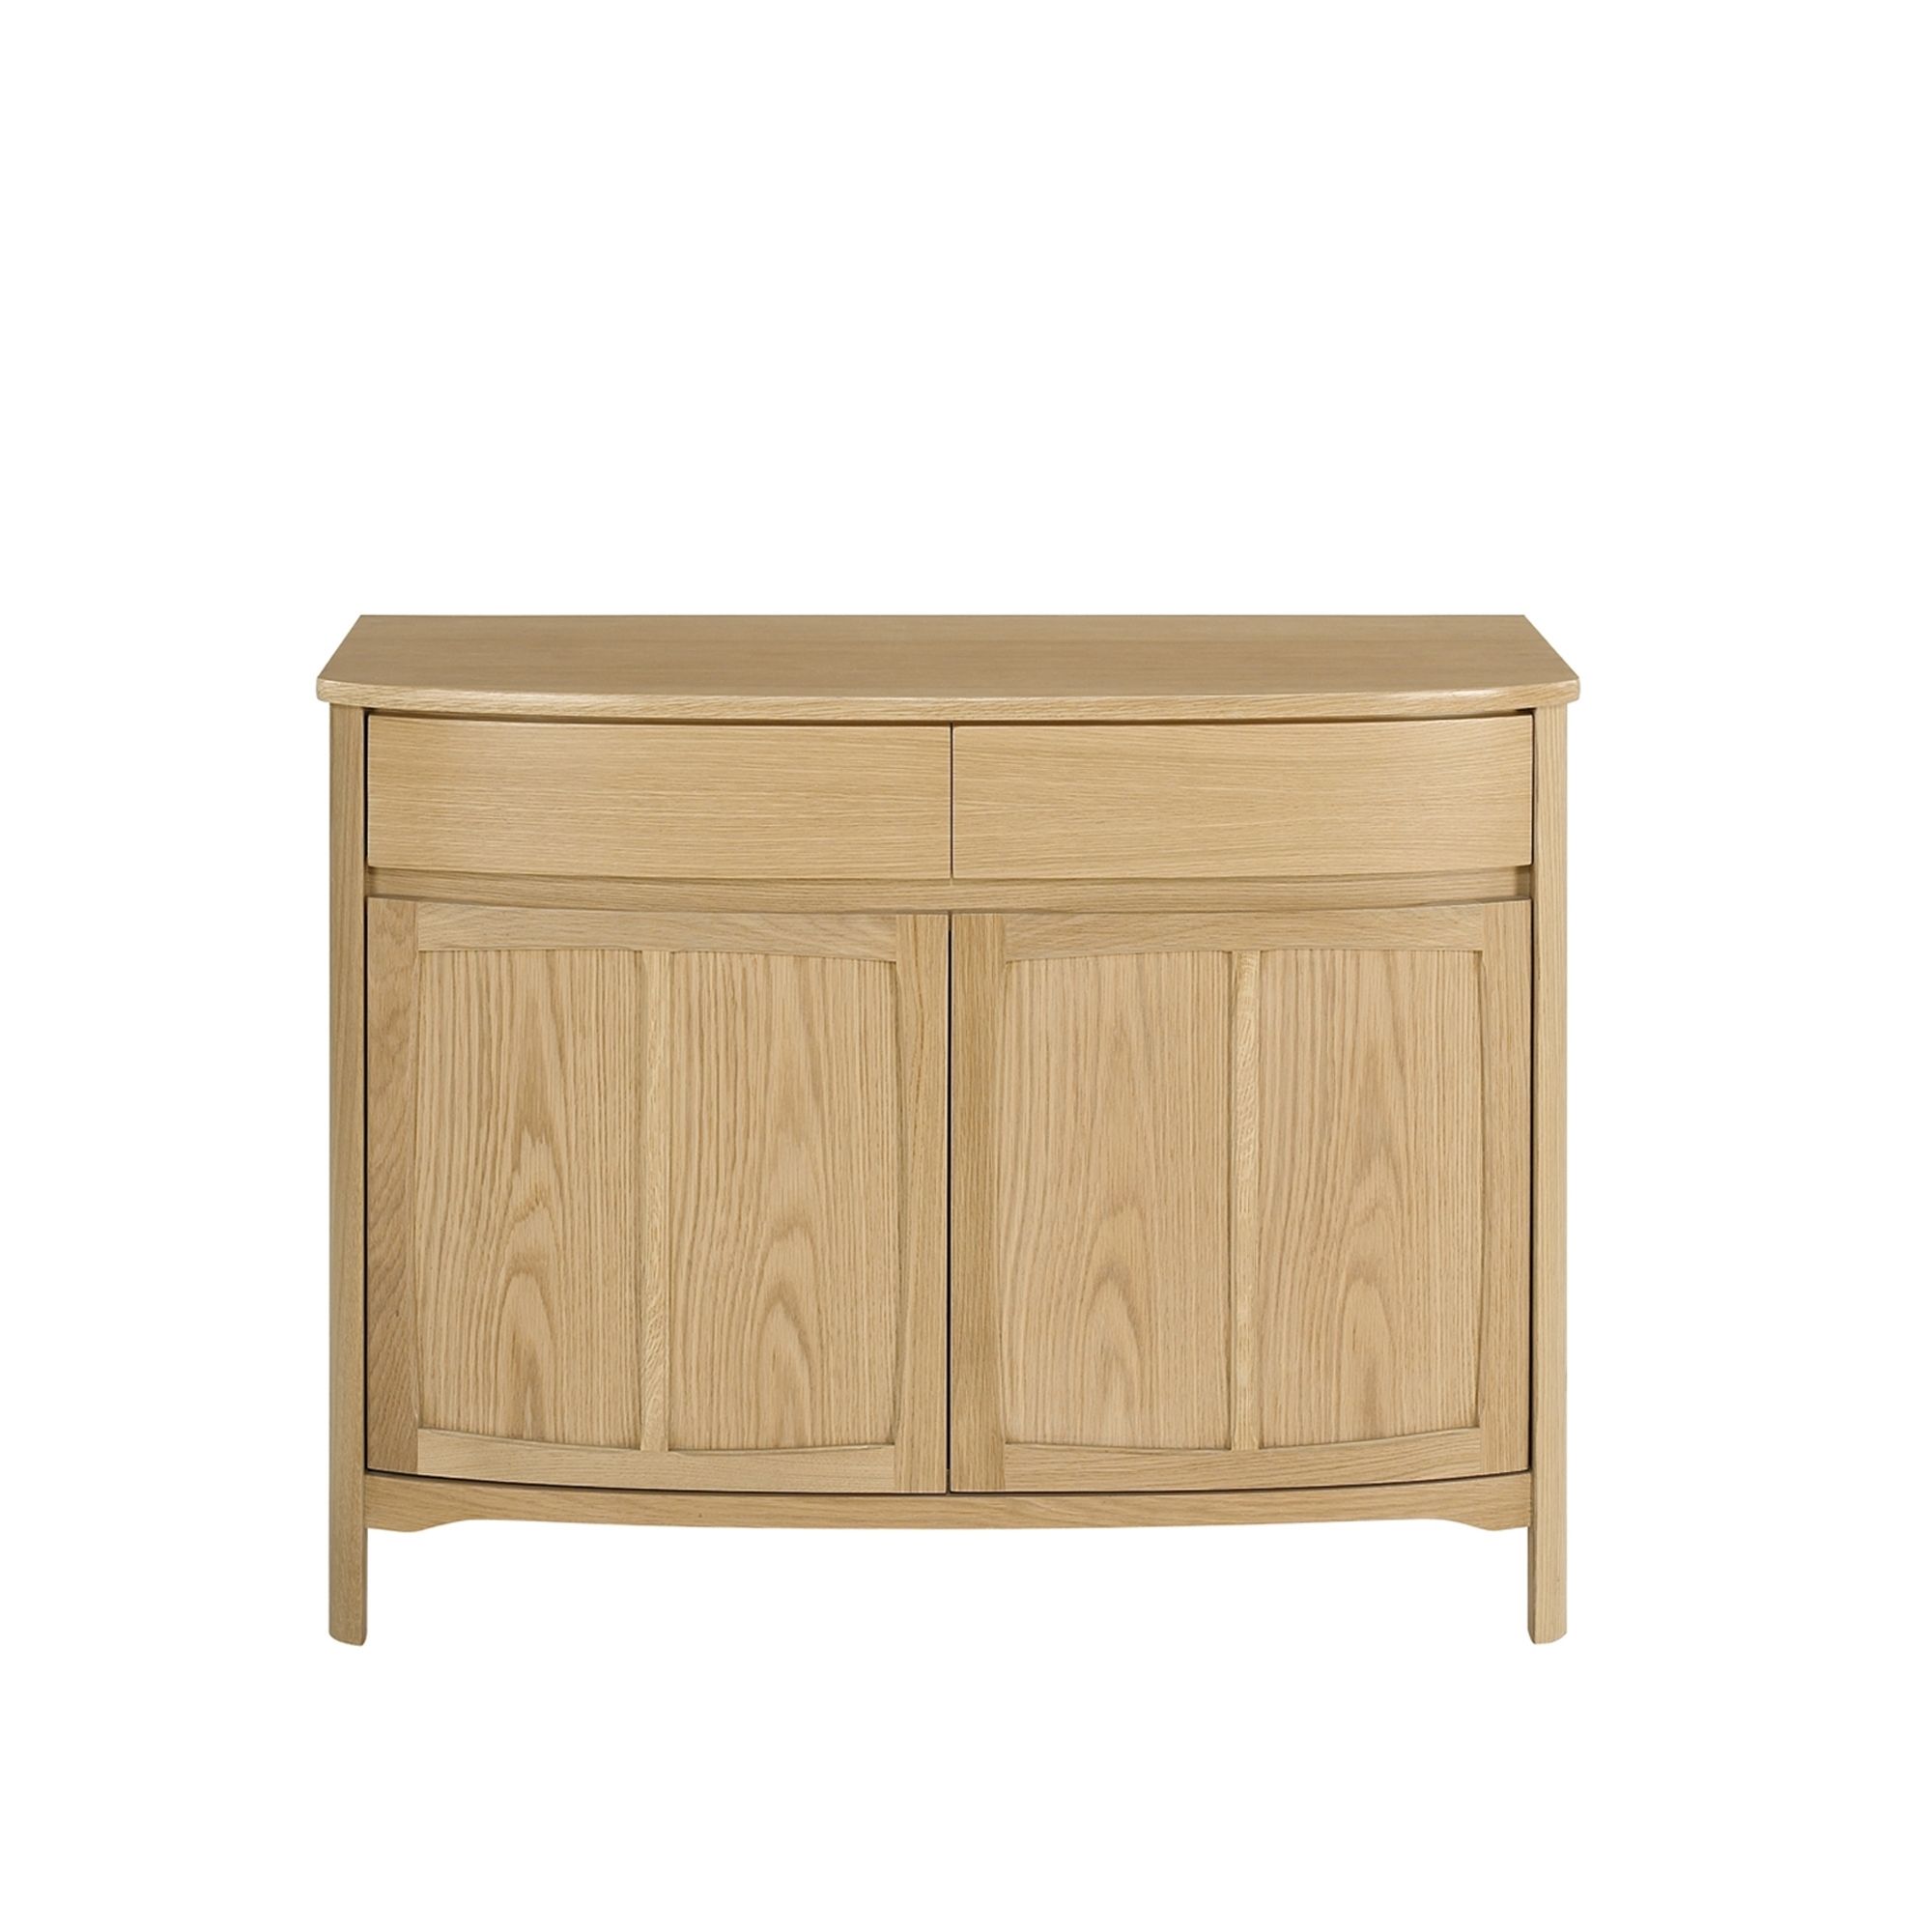 Nathan Shades Oak Shaped 2 Door Sideboard – Nathan – Cookes Furniture In Most Recently Released Natural Oak Wood 2 Door Sideboards (View 20 of 20)